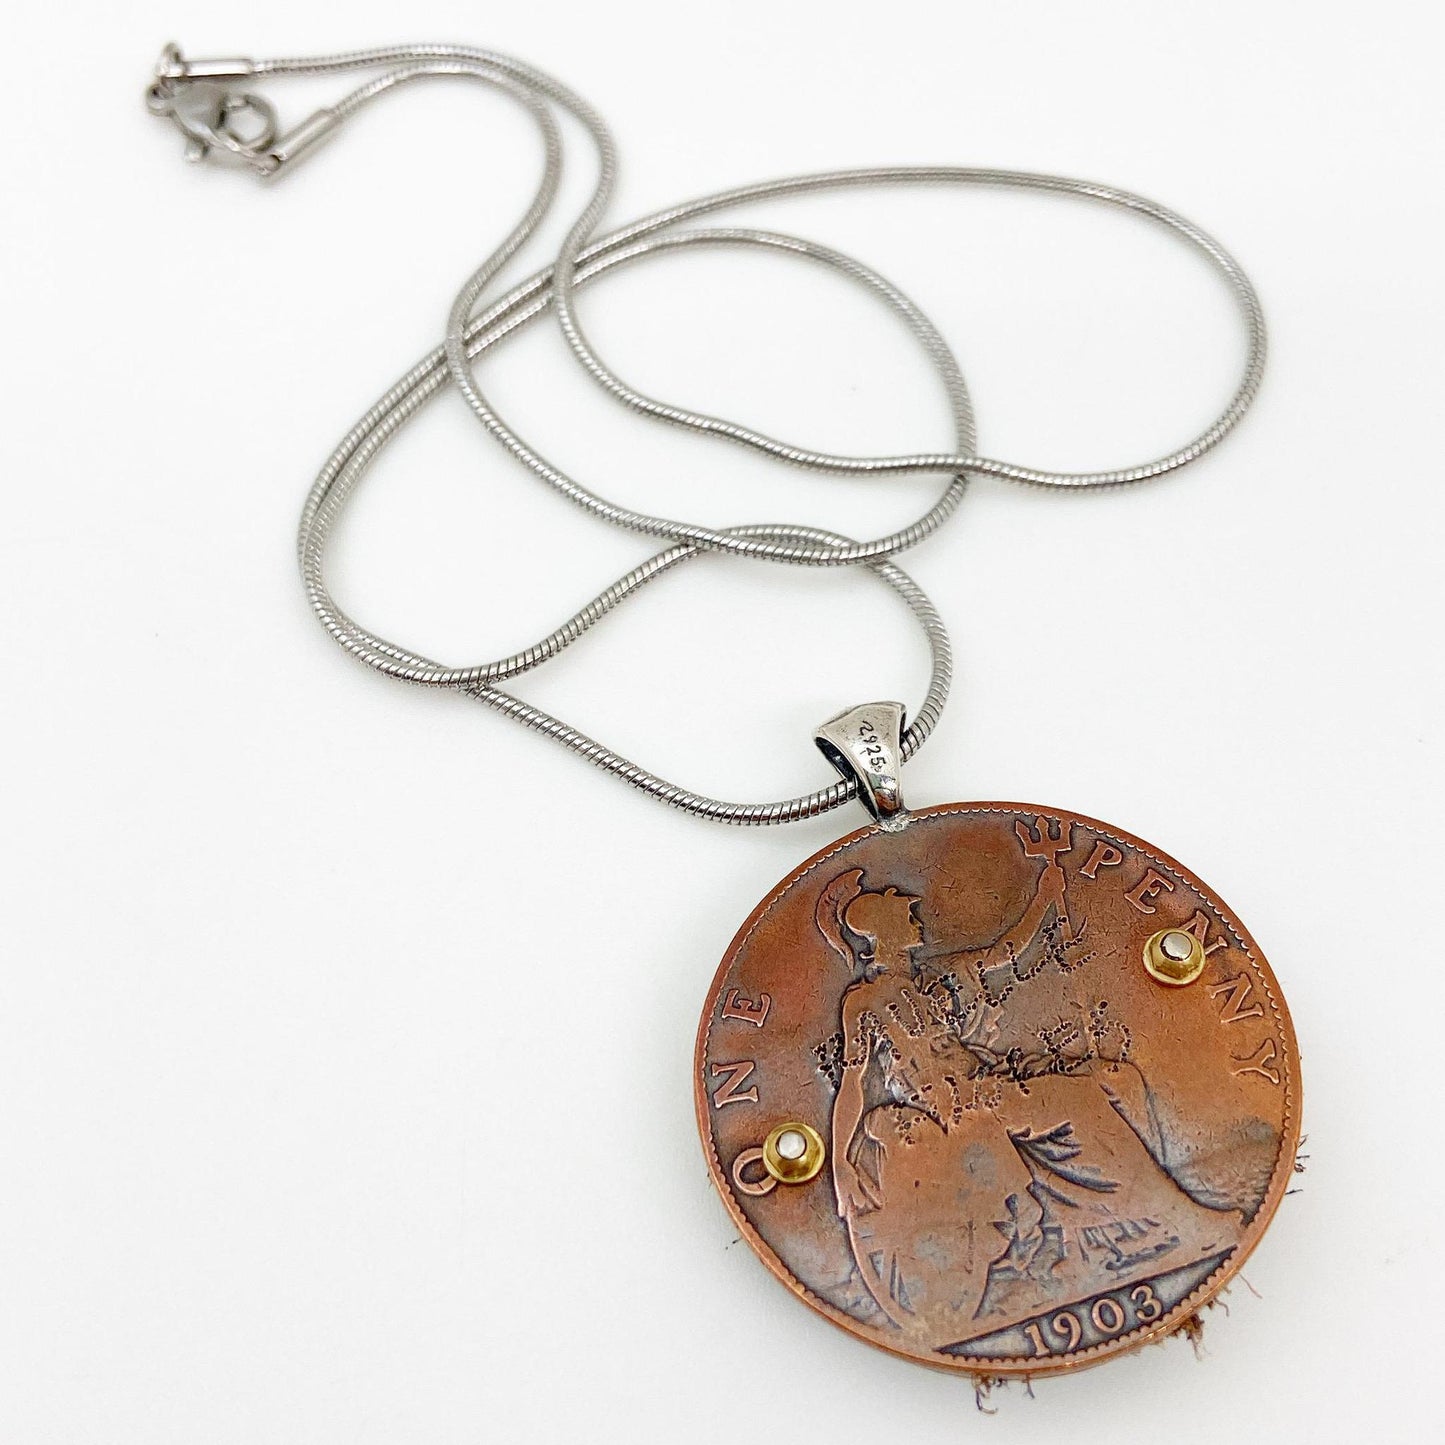 Necklace - Dog in Scarf - Enamel on Copper & Coin